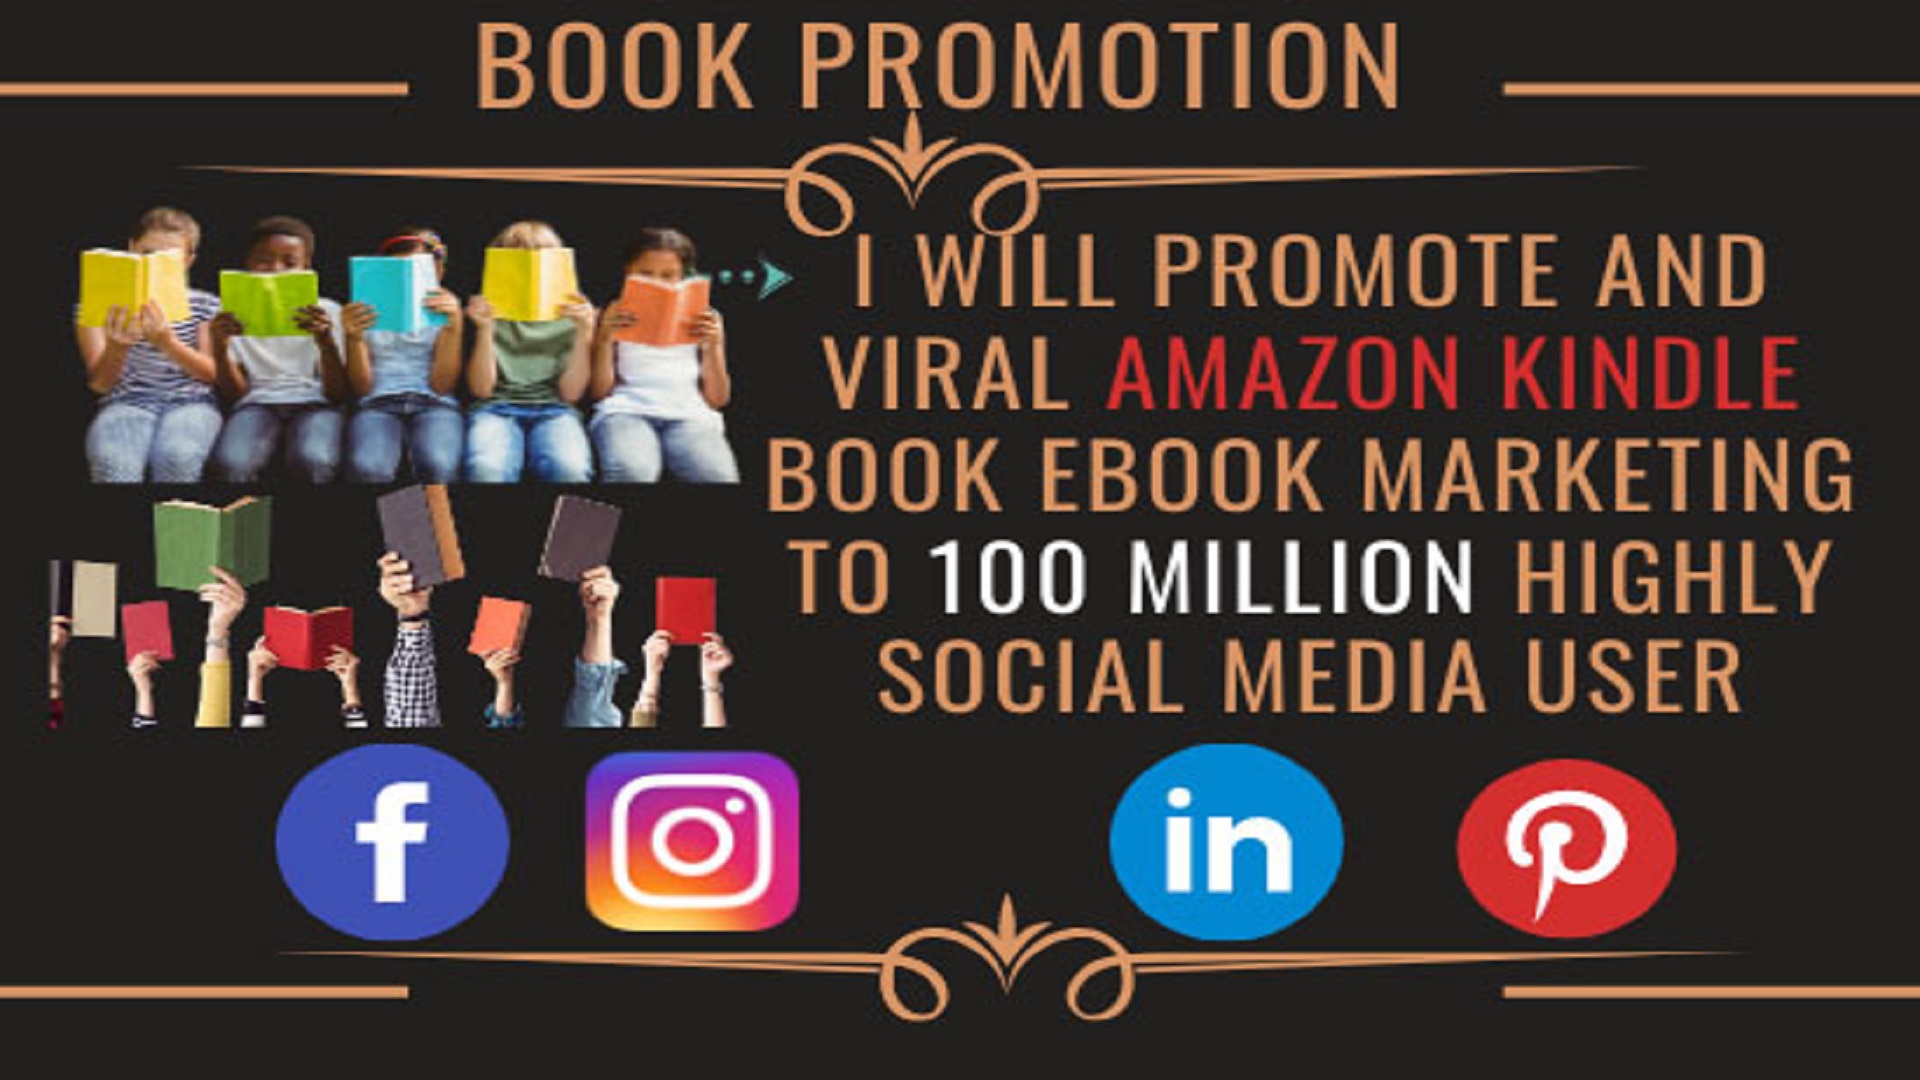 I Will Promote And Viral Amazon Kindle Book Ebook Marketing For 20